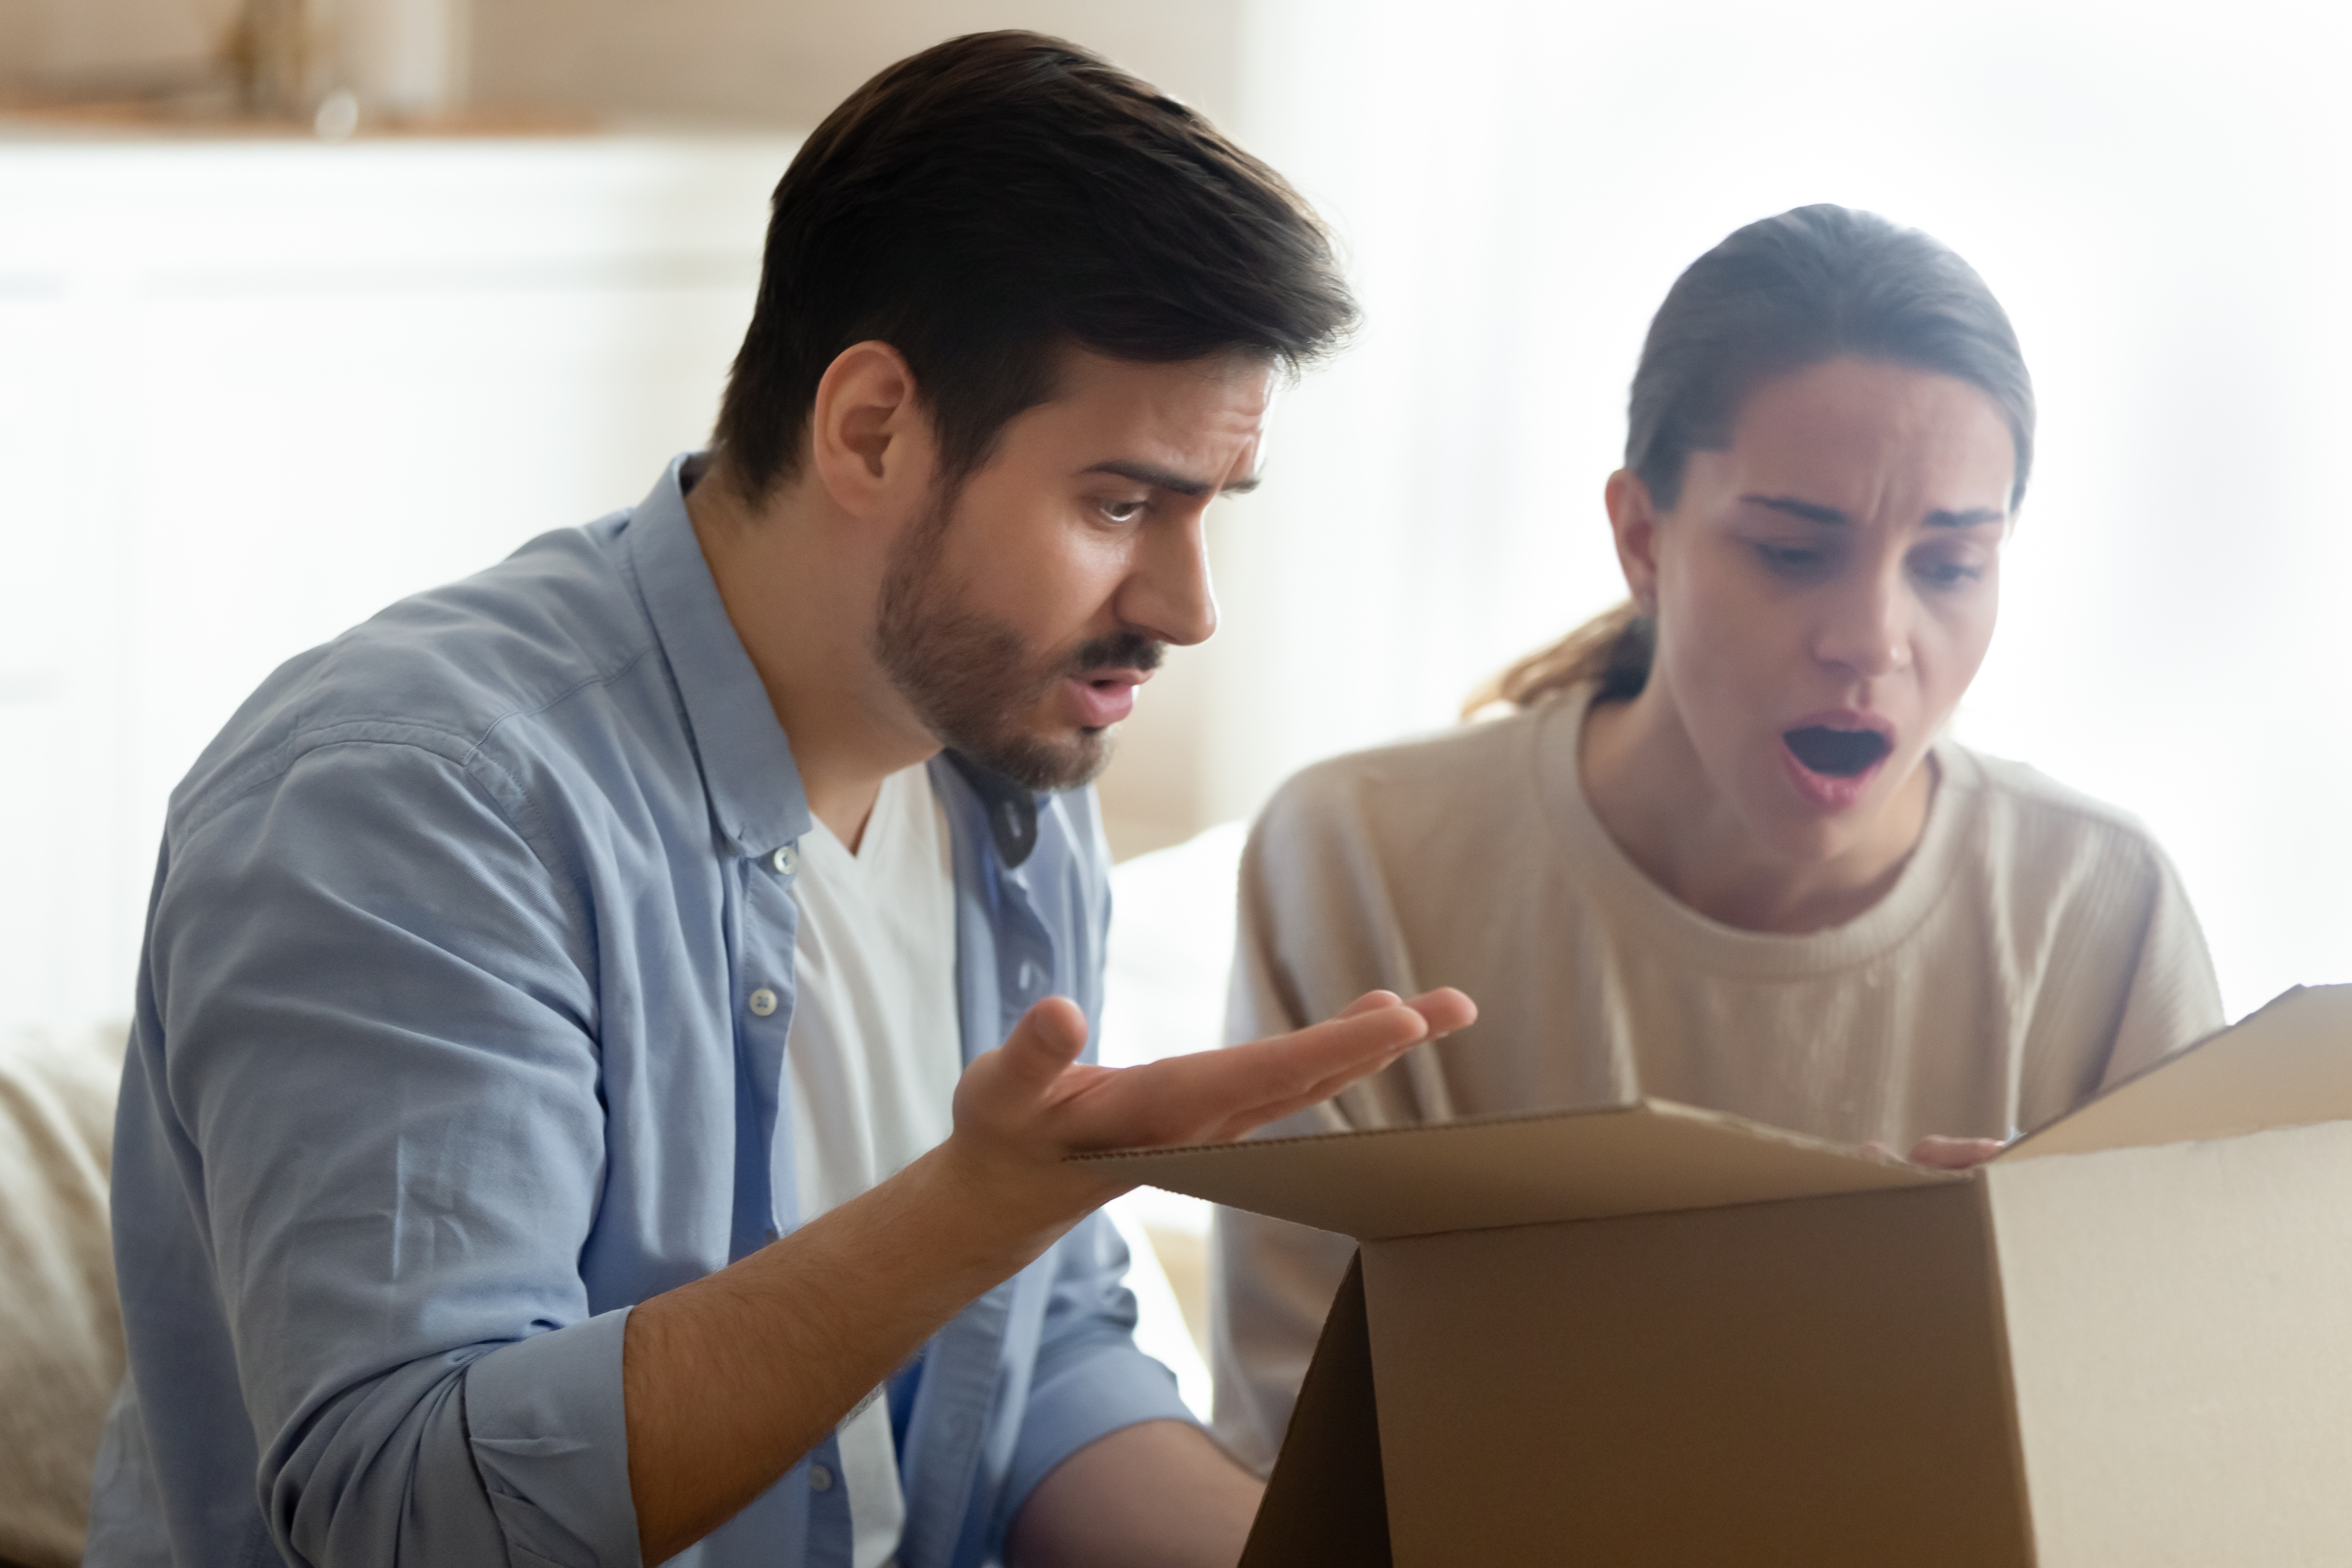 An annoyed couple staring at a delivery box | Source: Shutterstock